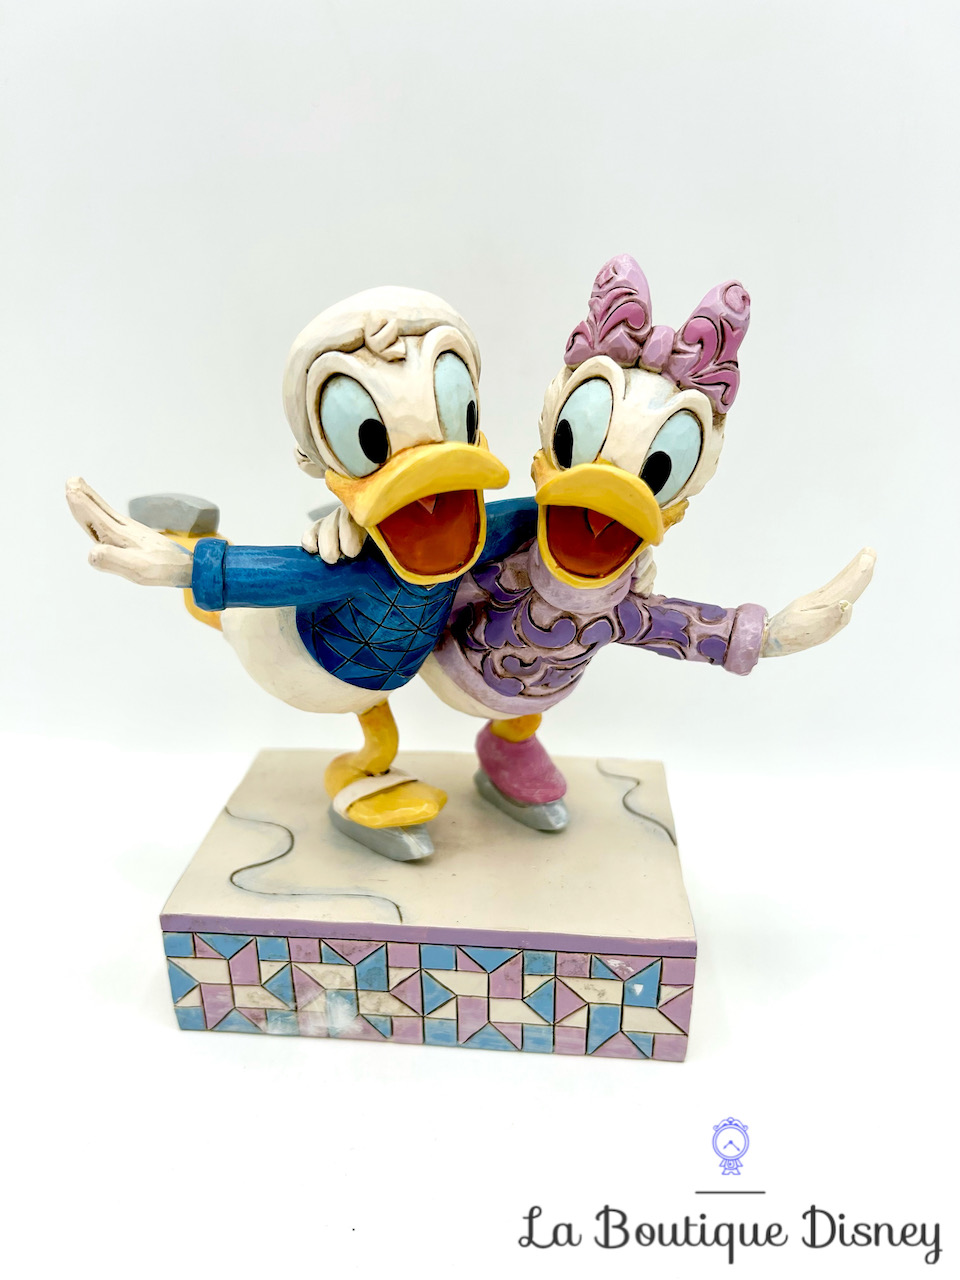 Figurine Jim Shore Donald Daisy Patinage Disney Traditions Showcase Collection 4033269 Pairs Skating